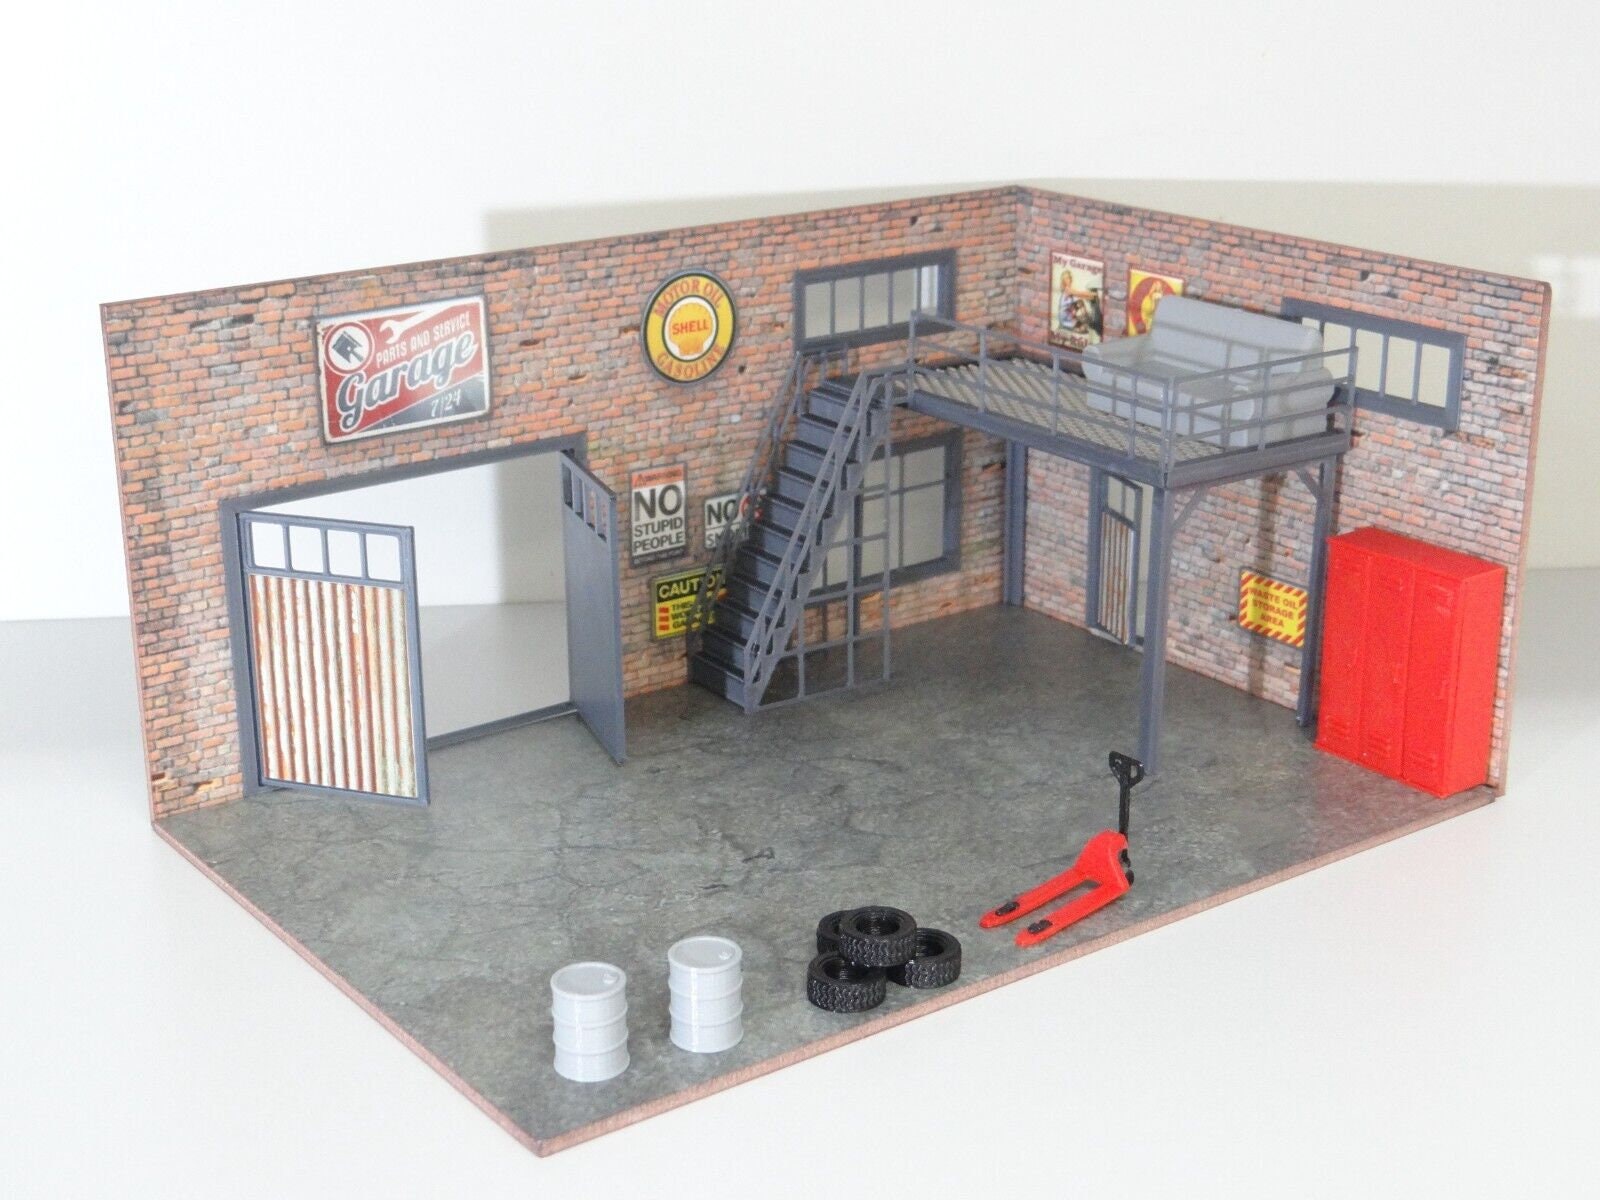 Two in One Diorama Model Display 1:43 Car Garage Double sided print –  dioramatoys